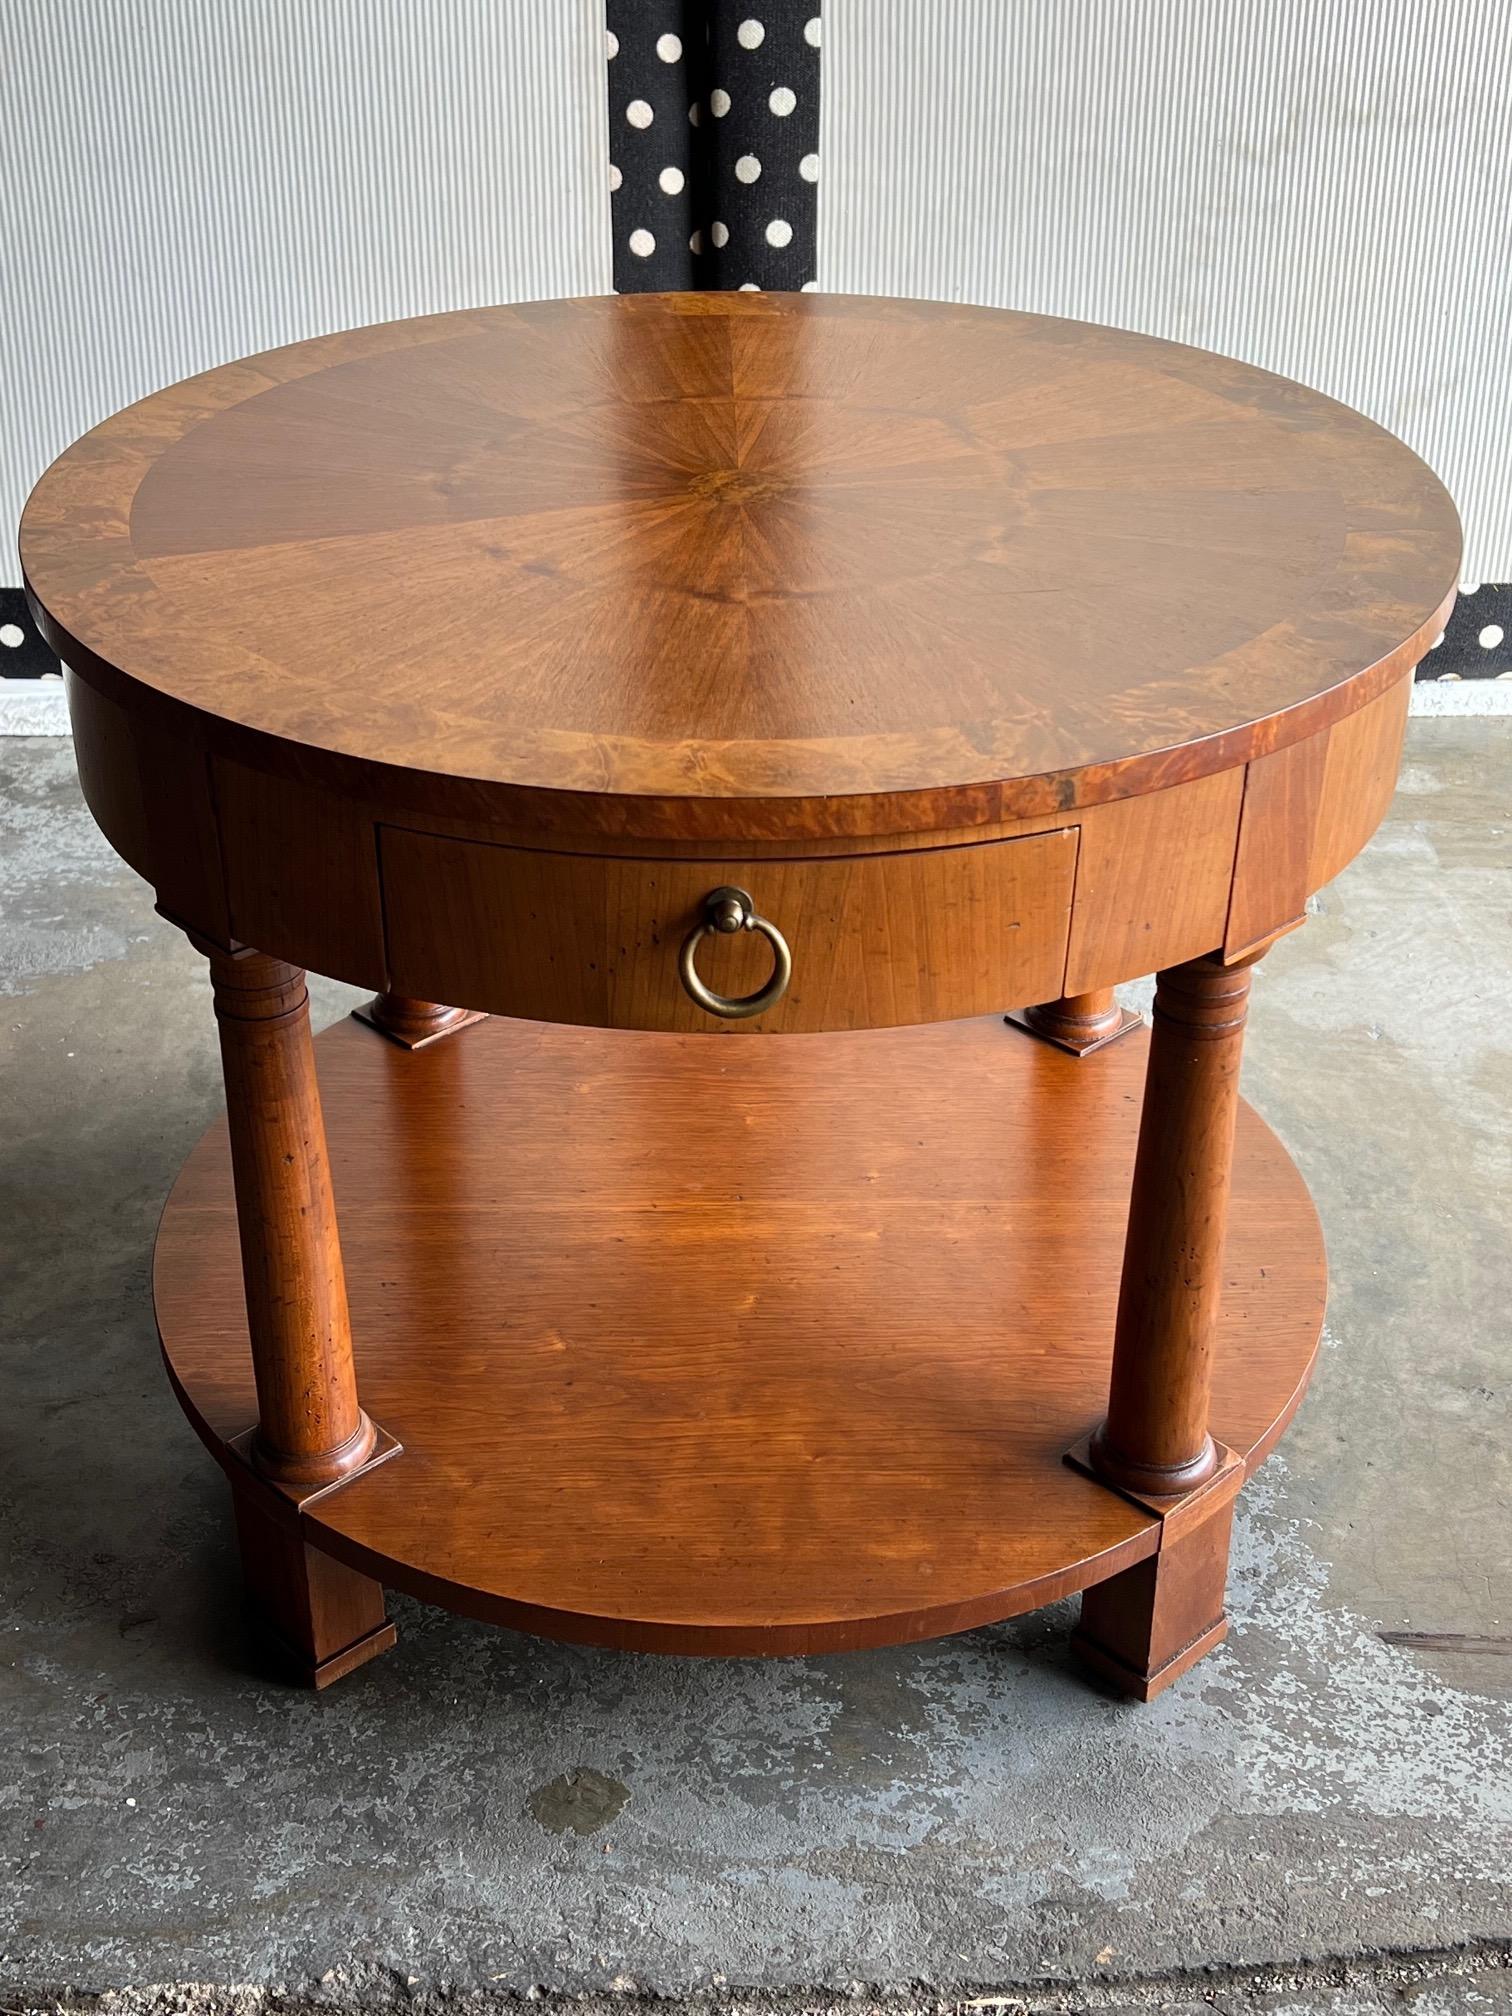 Cherry Lamp Table By Baker With Walnut Sunburst Top